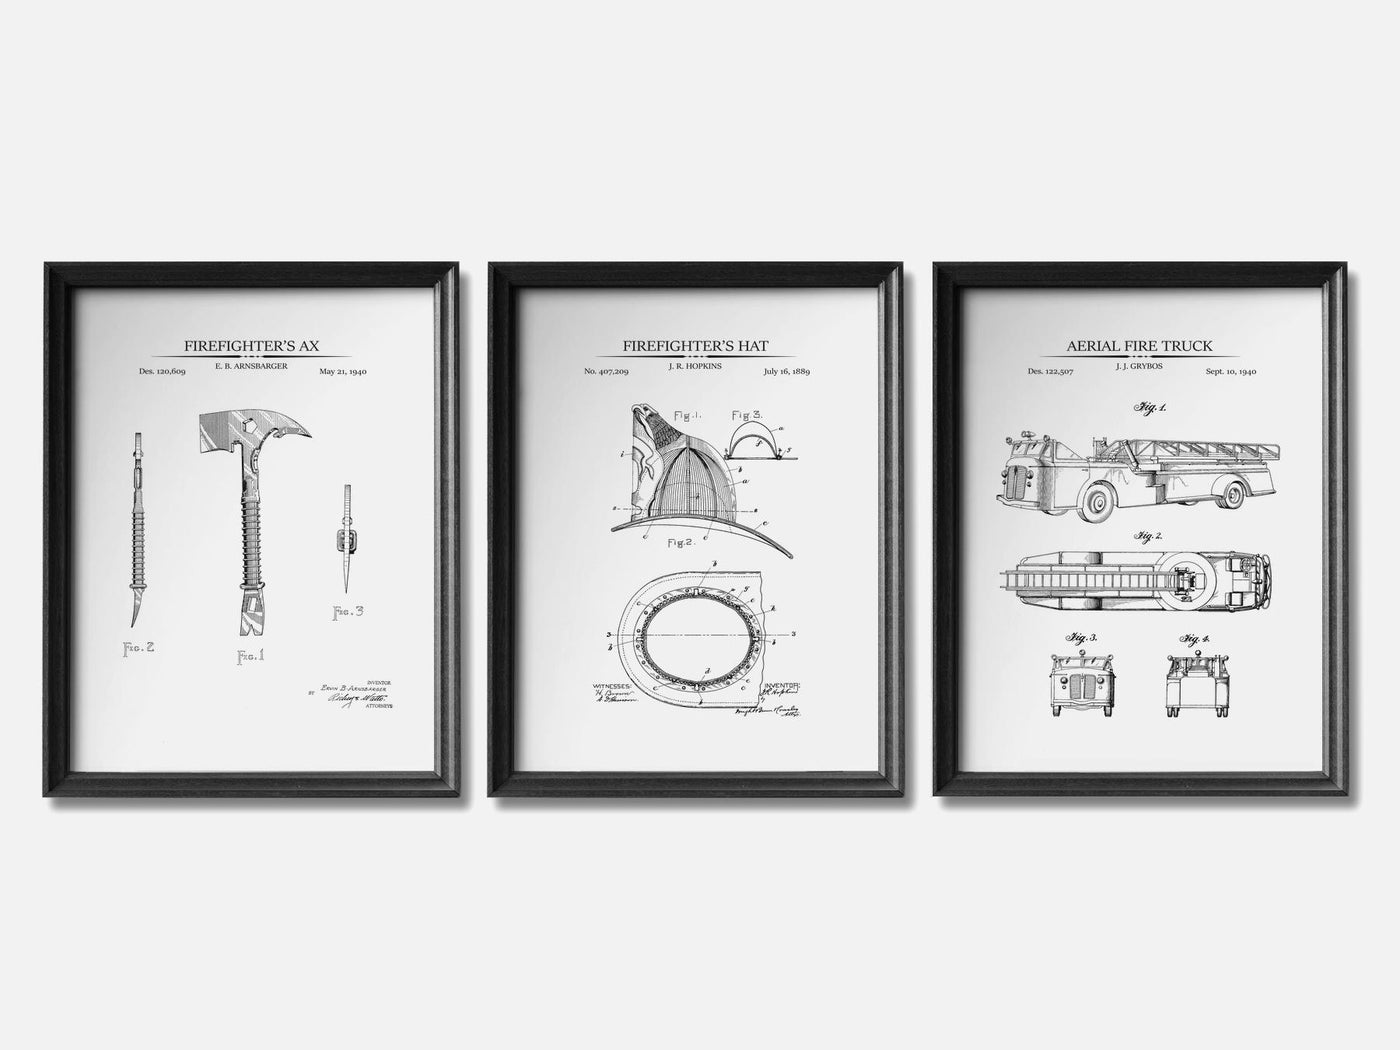 Firefighter Patent Print Set of 3 mockup - A_t10067-V1-PC_F+B-SS_3-PS_11x14-C_whi variant